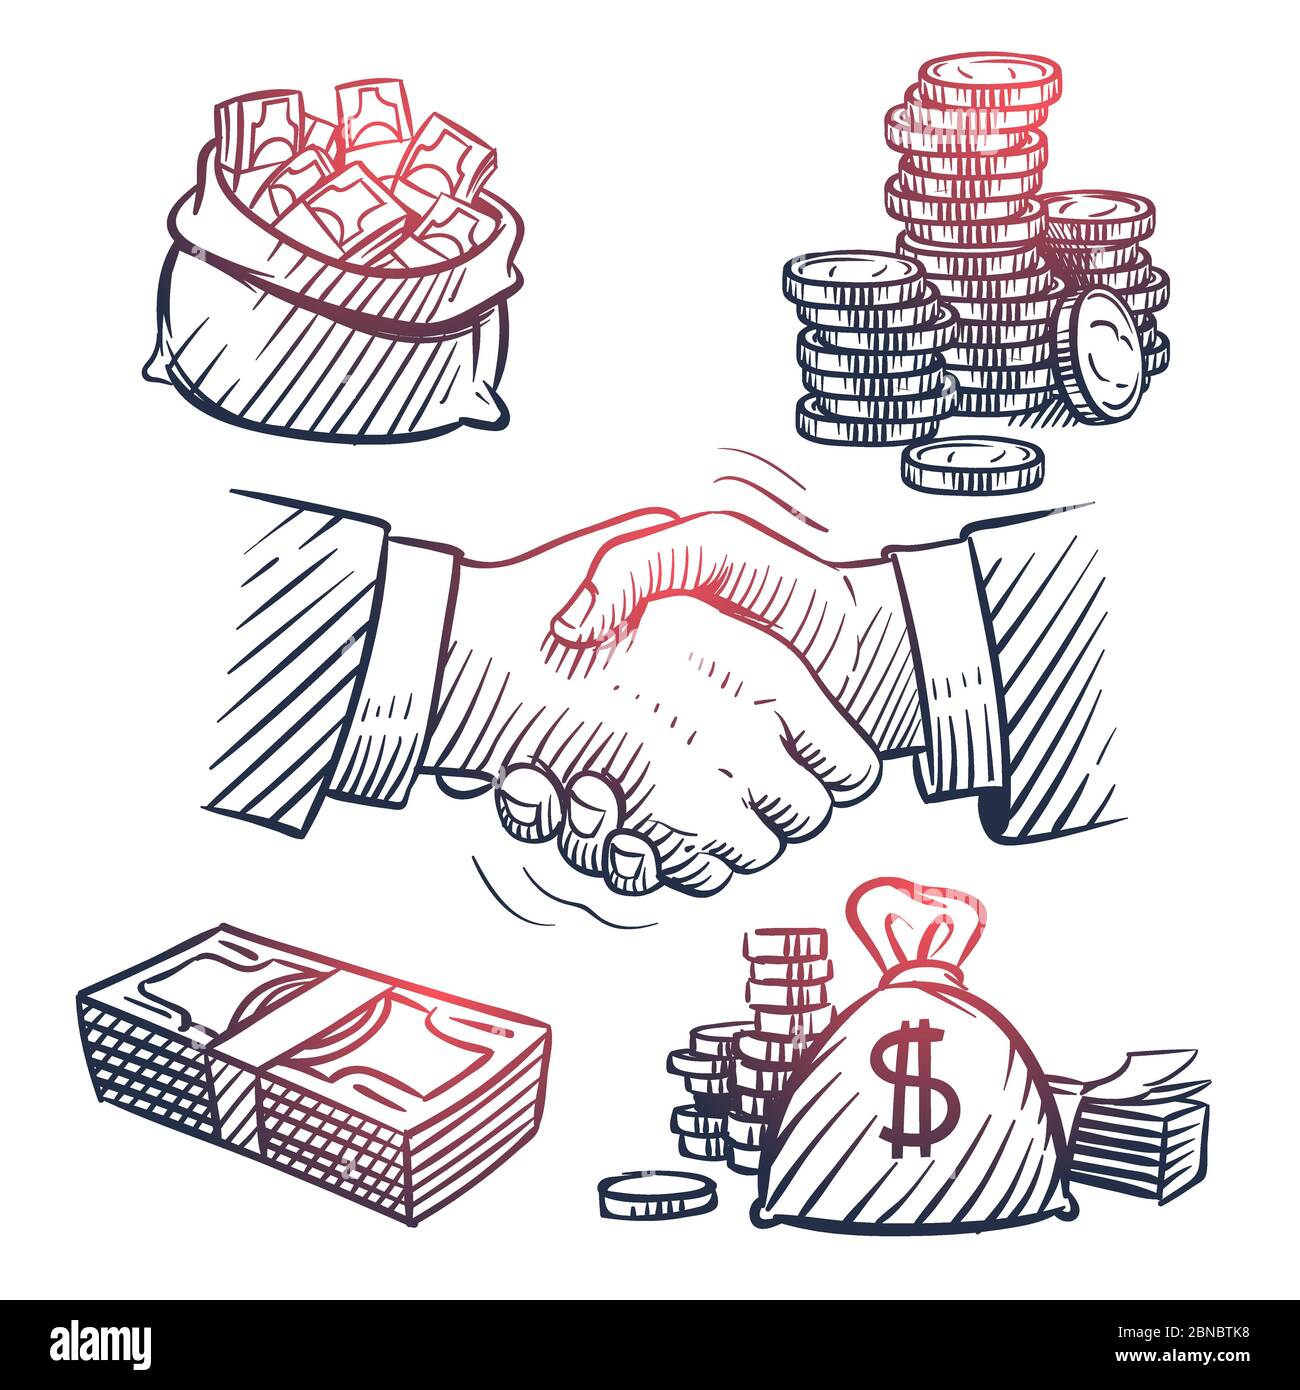 Sketch hand shaking. Doodle dollars packs, money bag, gold coins and cash symbols. Great deal and business profit vector concept. Finance handshake and agreement, cash money and teamwork illustration Stock Vector